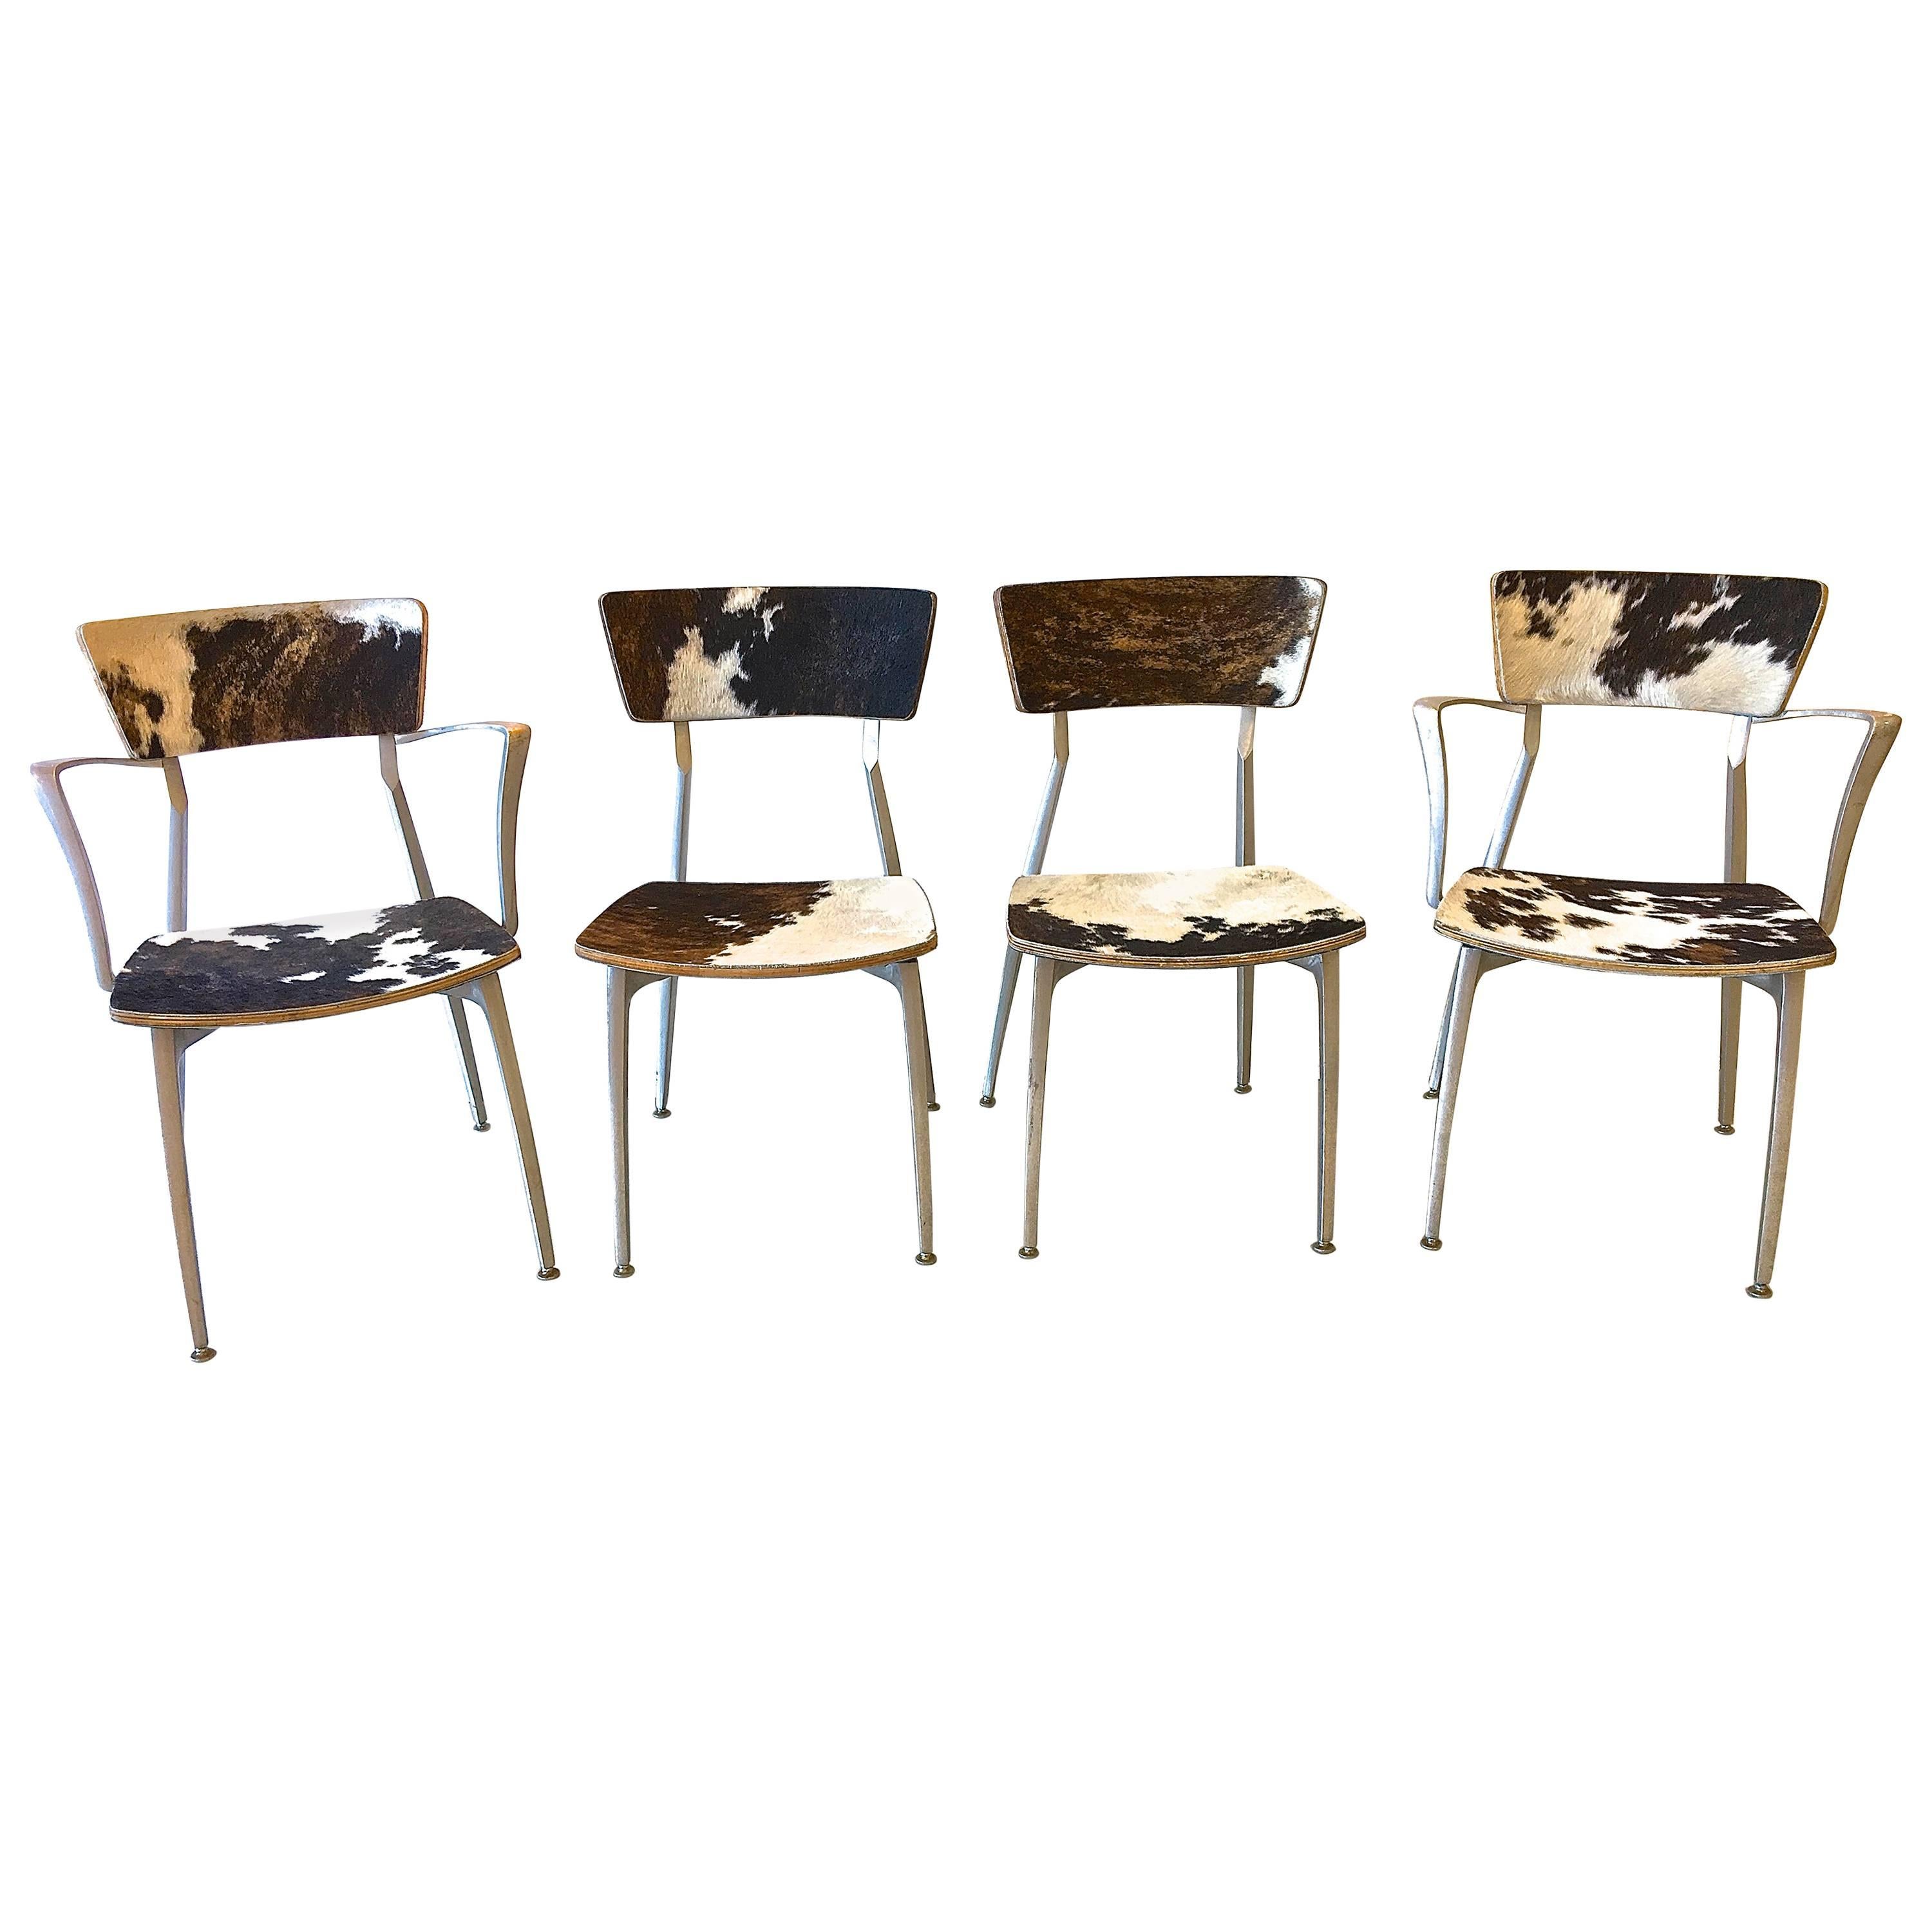 Mid-Century Modern Sand-Cast Aluminum Set of Four Chairs in Cowhide Upholstery